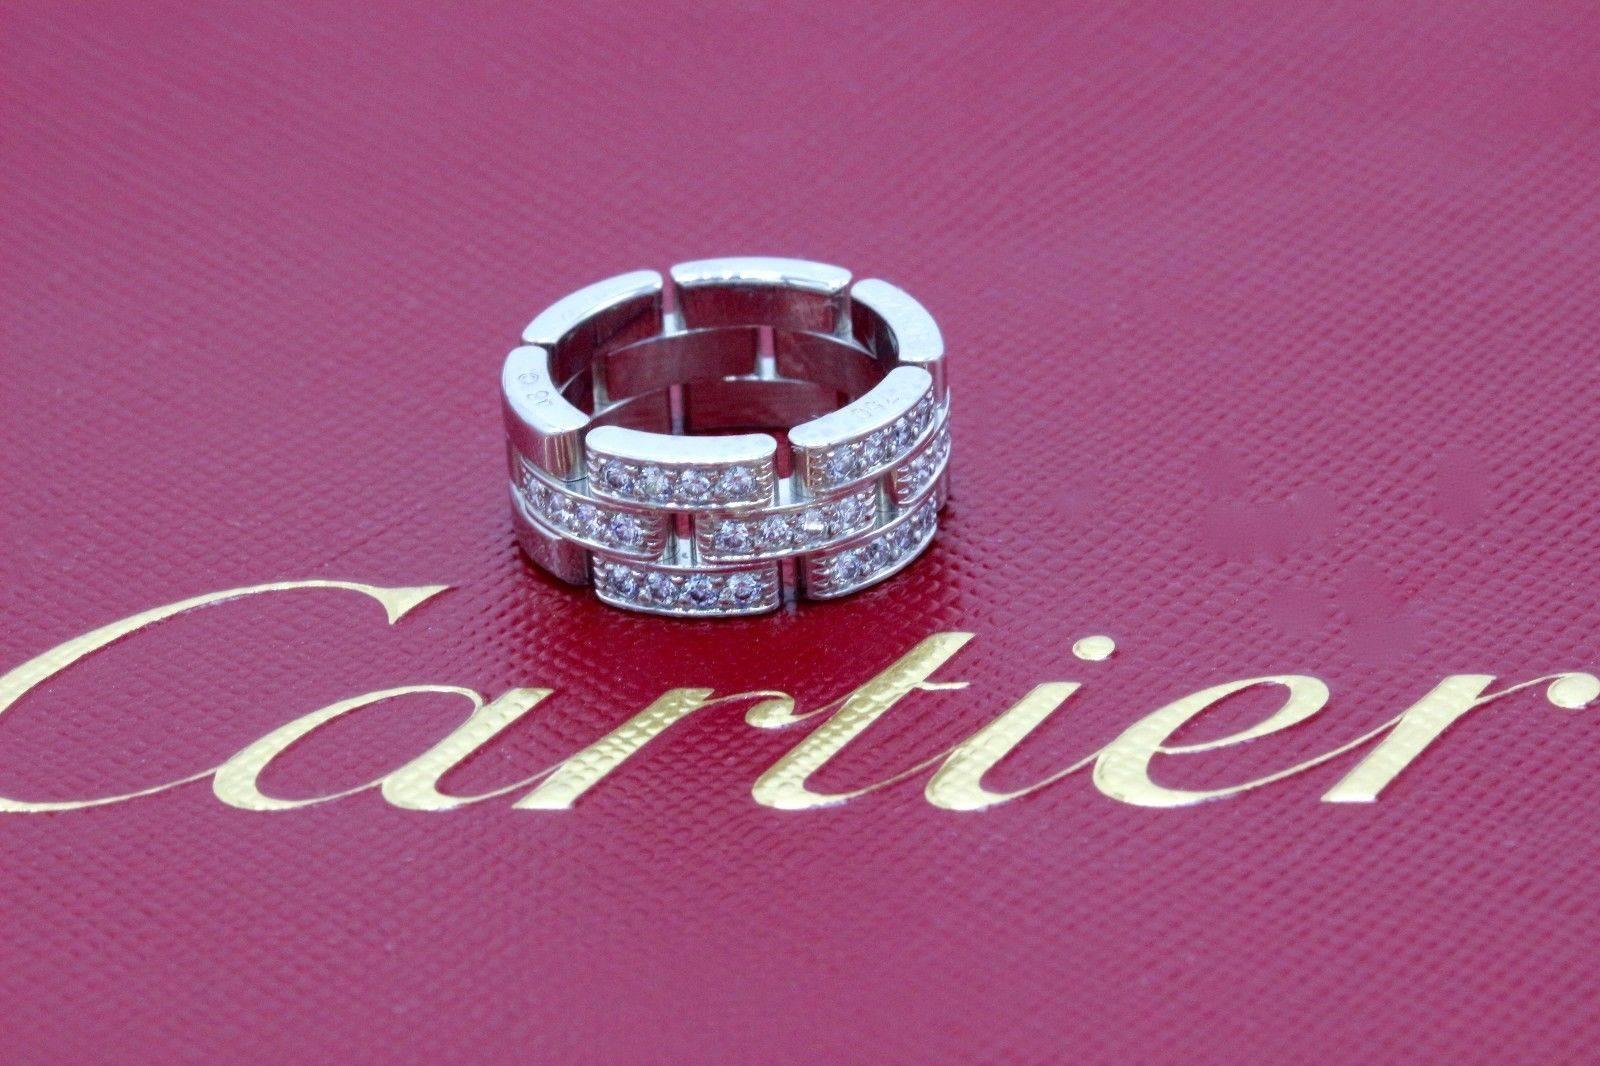 Brand: Cartier 
Style: Links & Chains
Year Purchased: 2005
Ring Size: 48 / 4 U.S
Metal: 18K White Gold 
Metal Purity: 750 
Hallmark: 